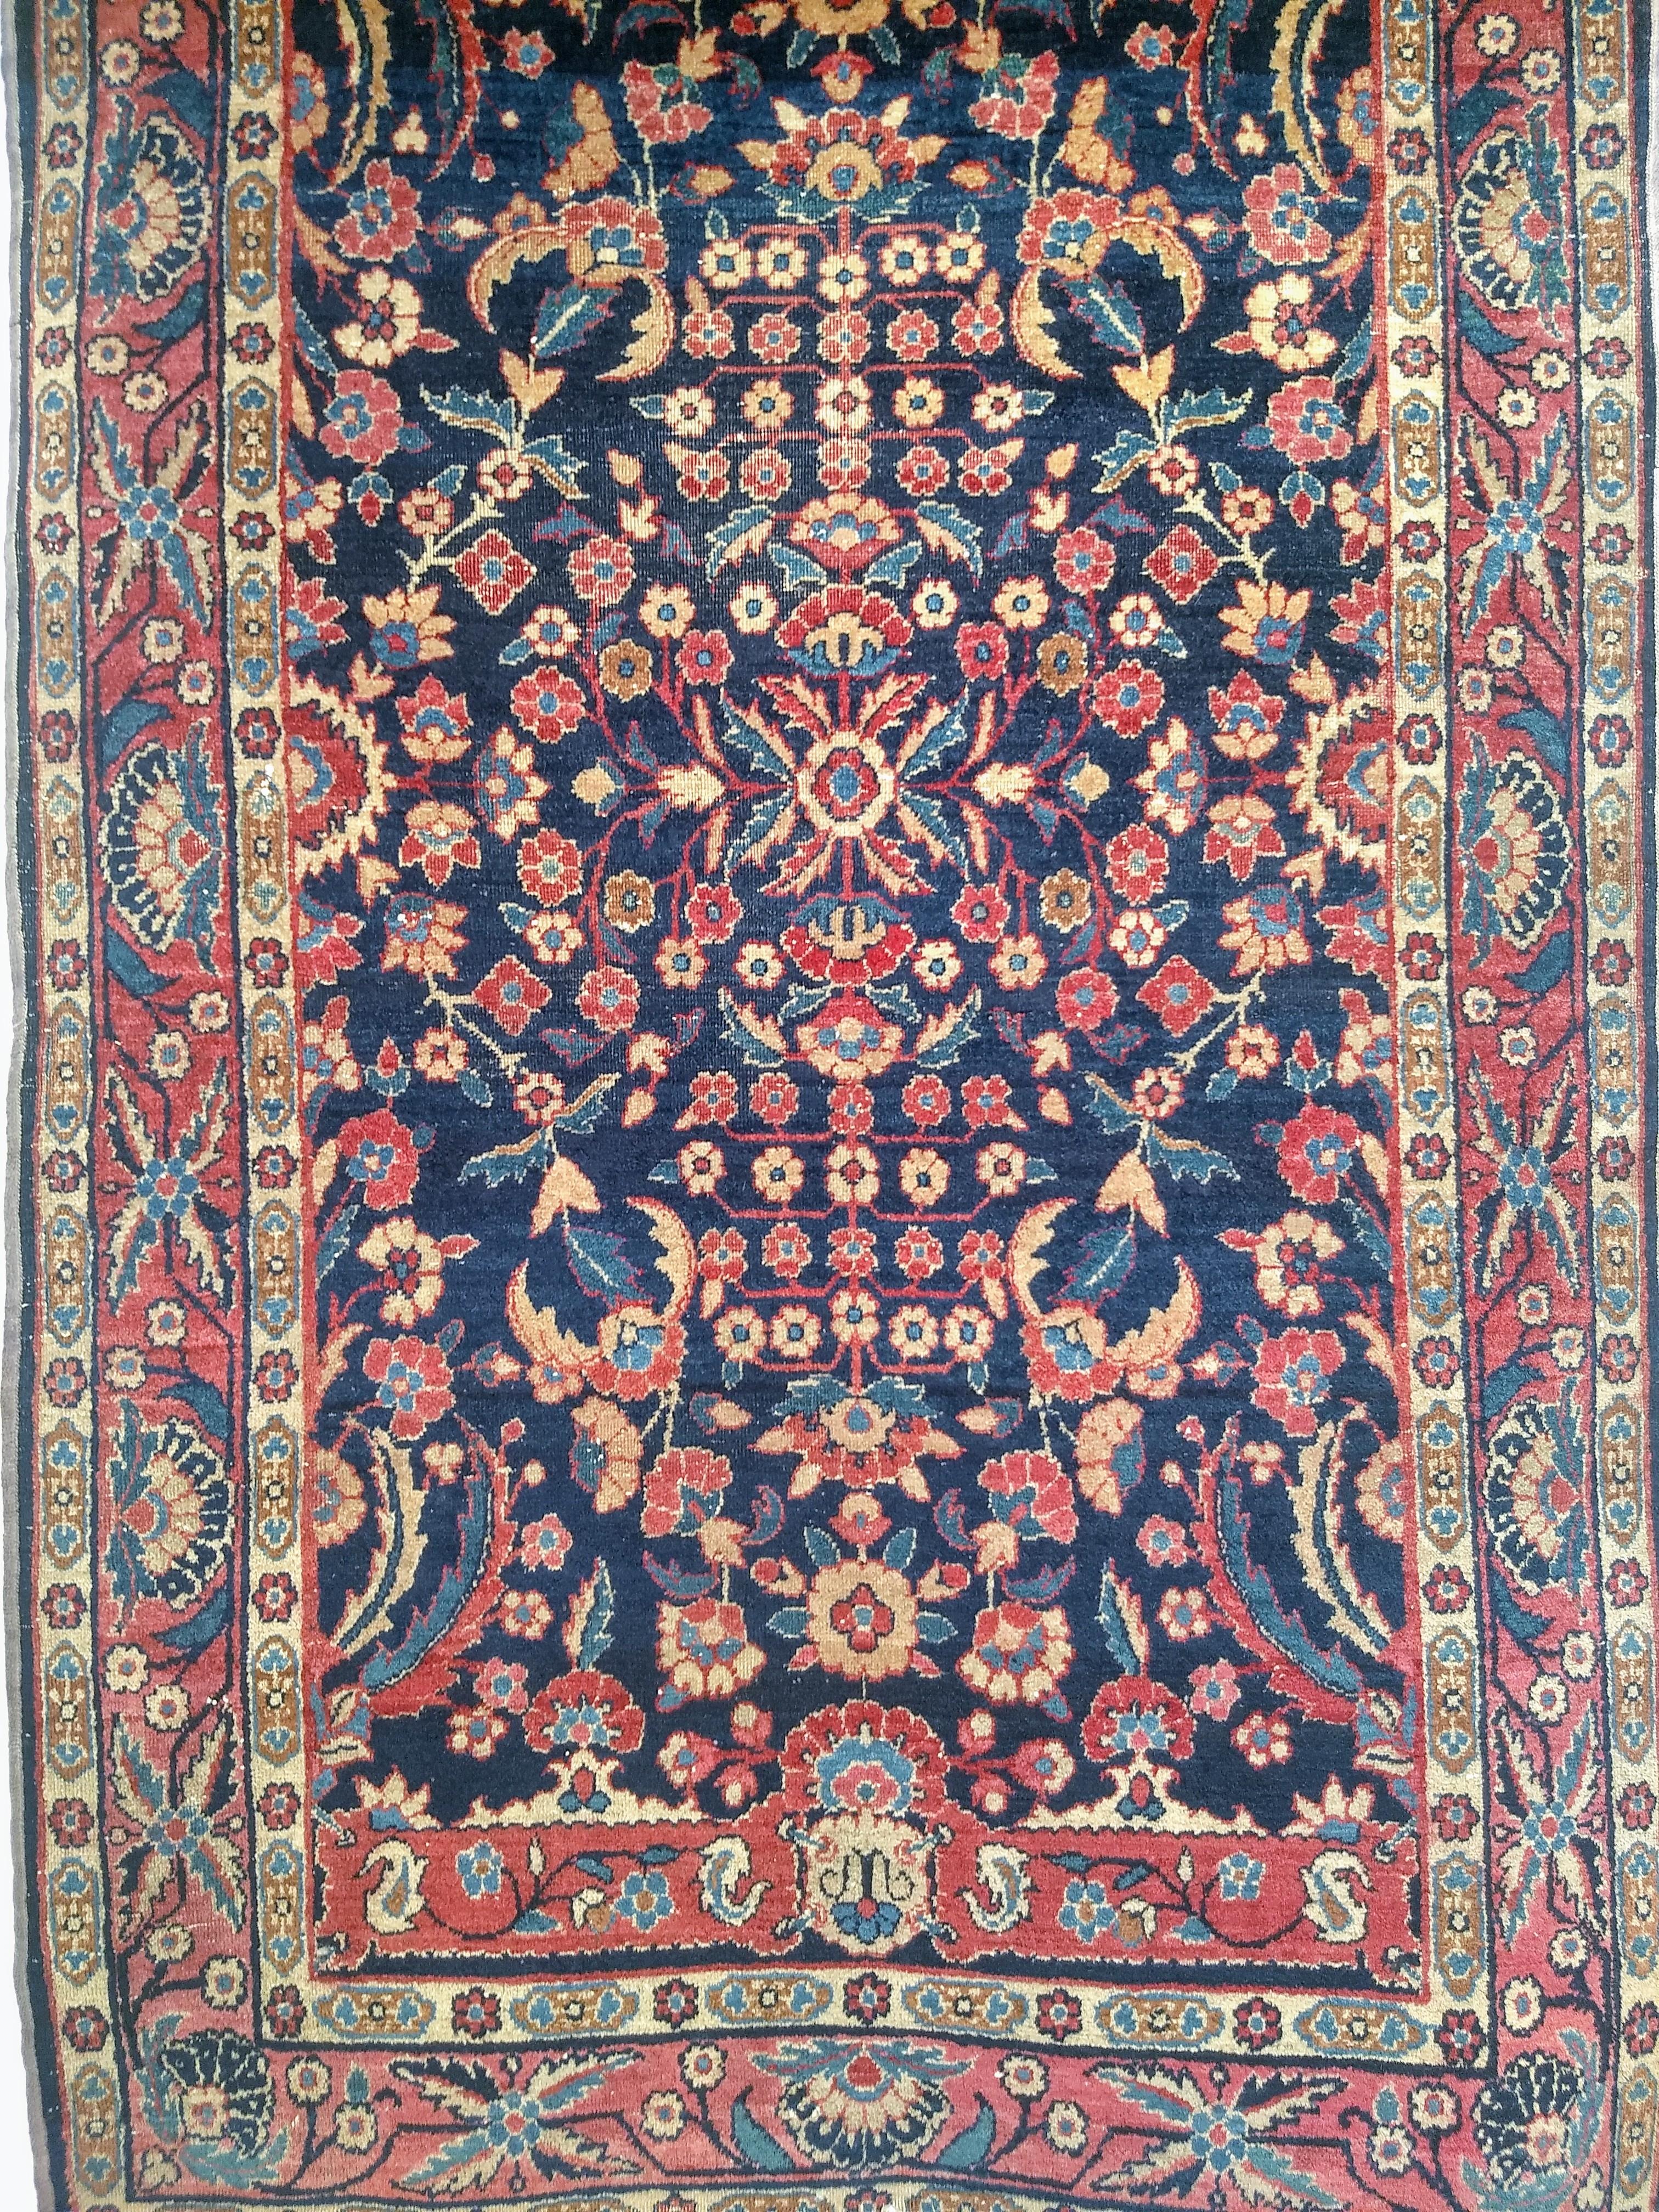  Vintage Agra rug in allover floral pattern in navy Blue and red colors from the early 1900s.   This antique Agra rug has a traditional Mughal design of the rugs that were woven in 16th century India. The field has 